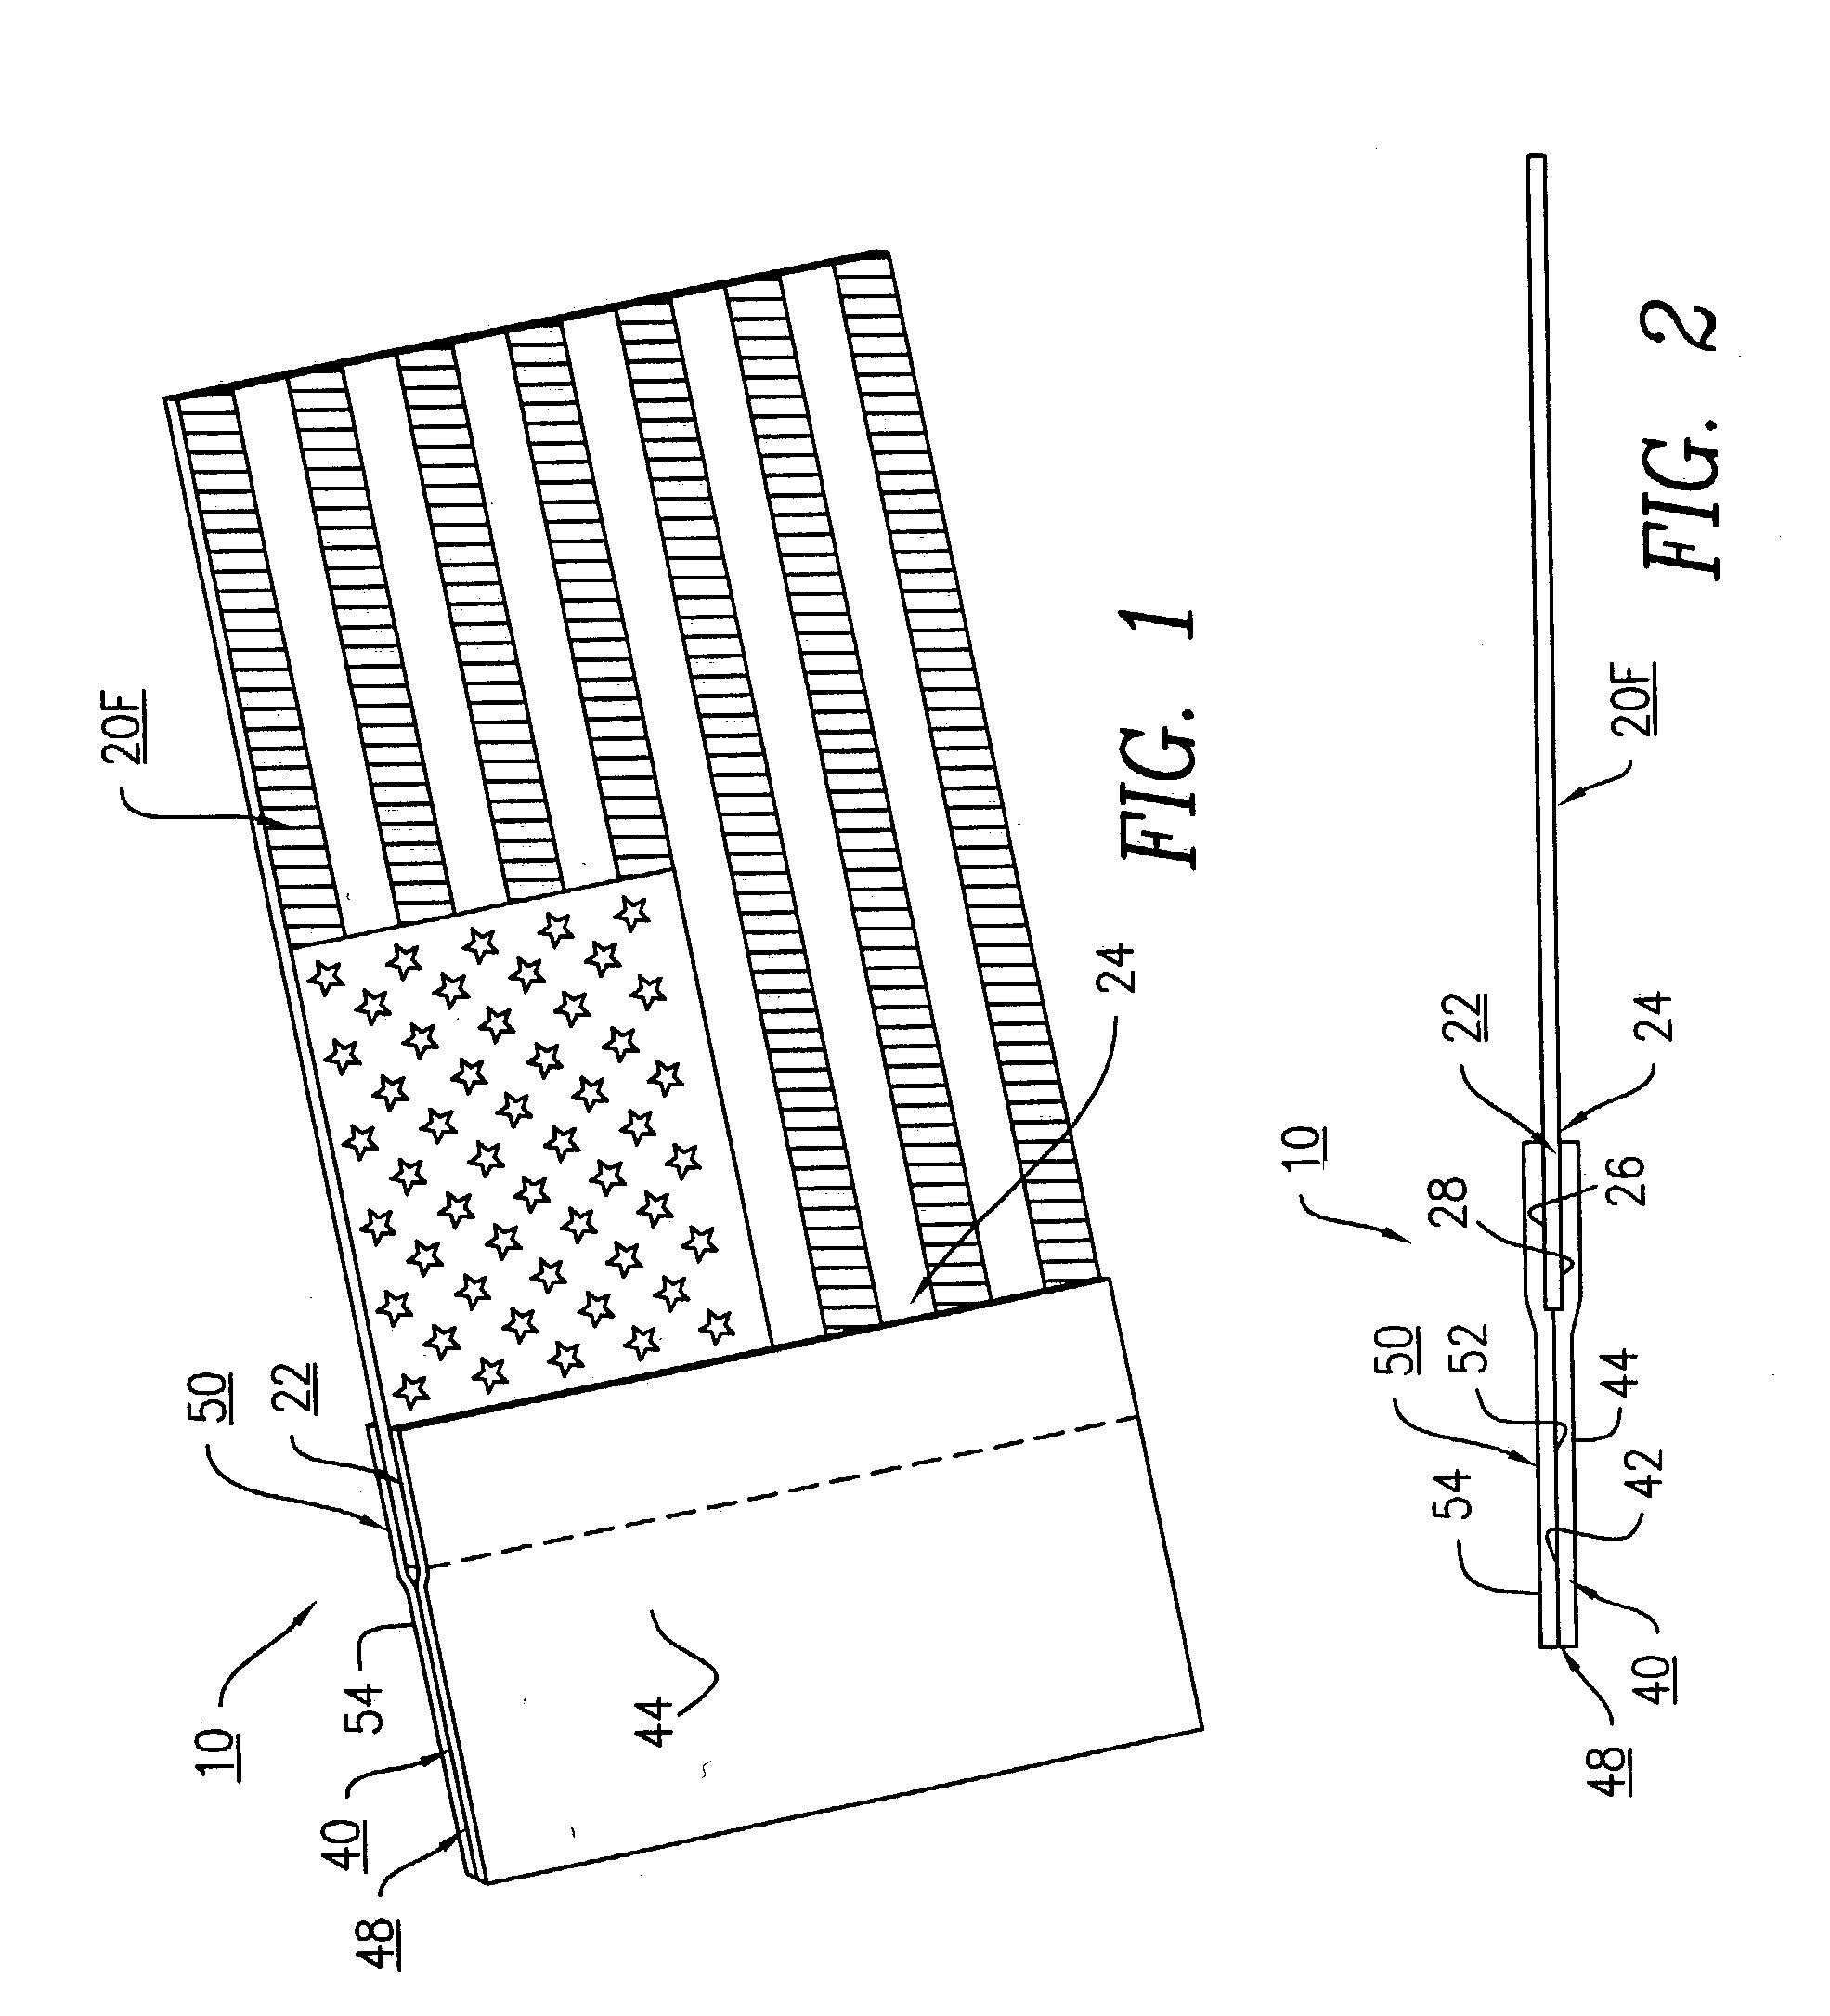 Mounting display device for flags, banners or pennants having magnetic strips thereon for mounting on vehicles and other metal structures